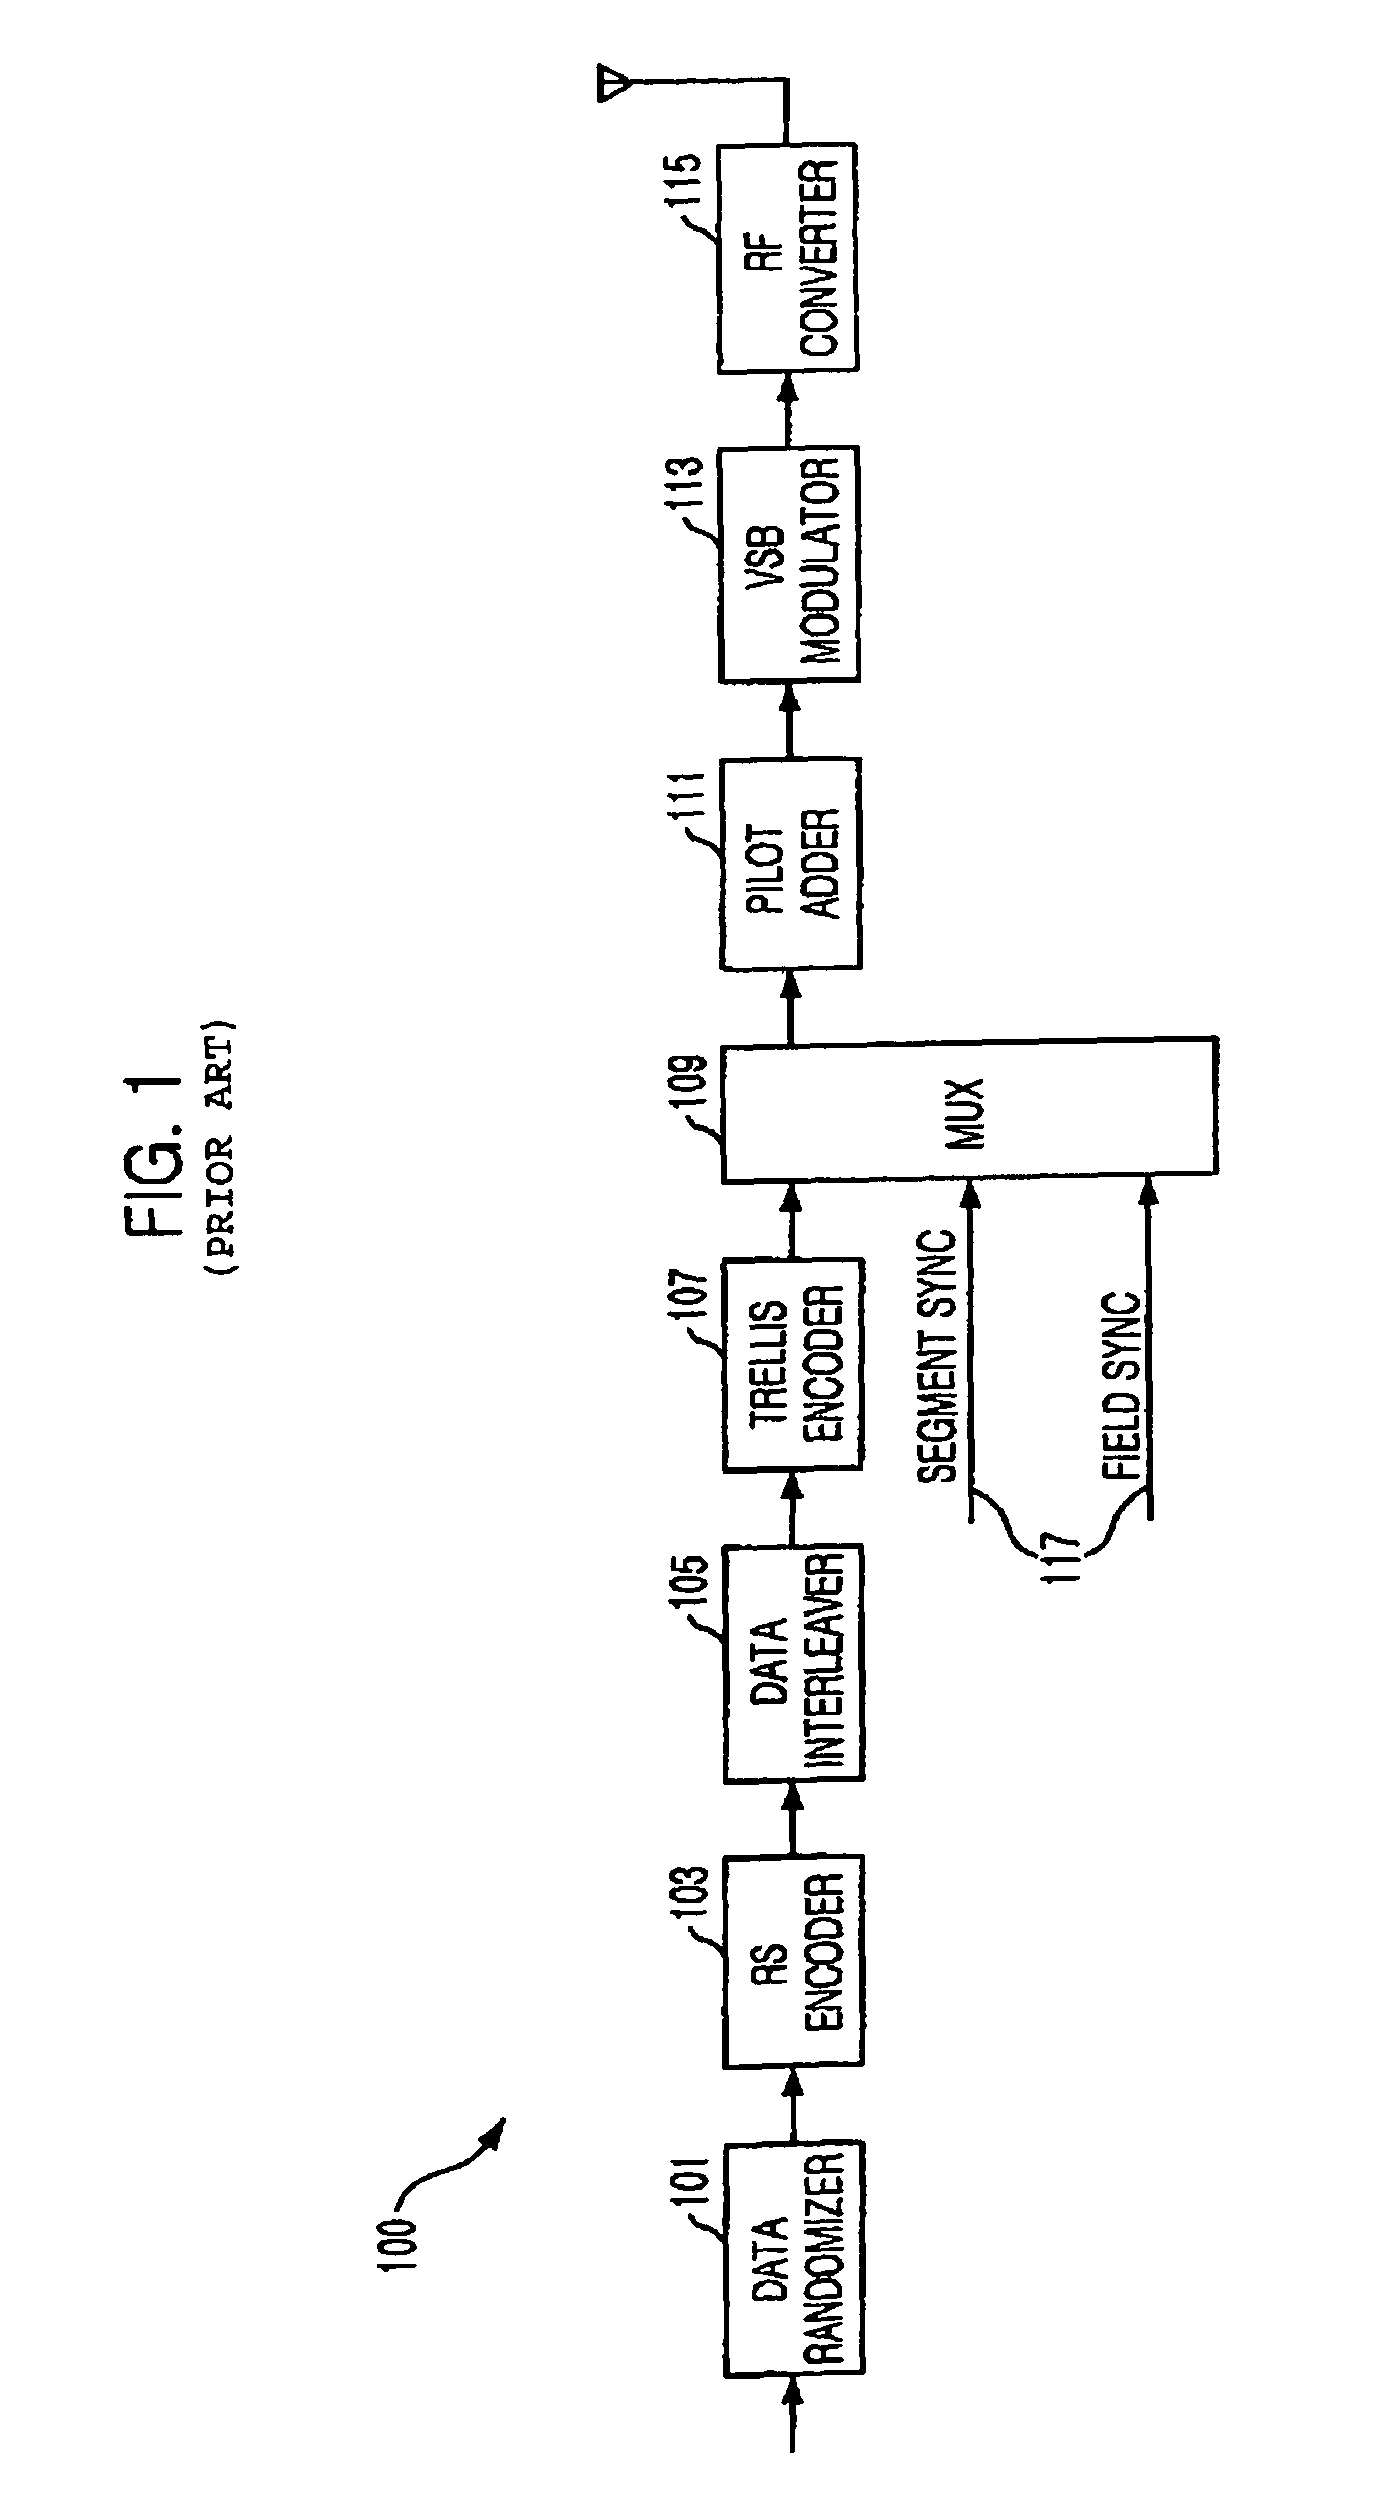 Digital television transmitter and receiver for using 16 state trellis coding